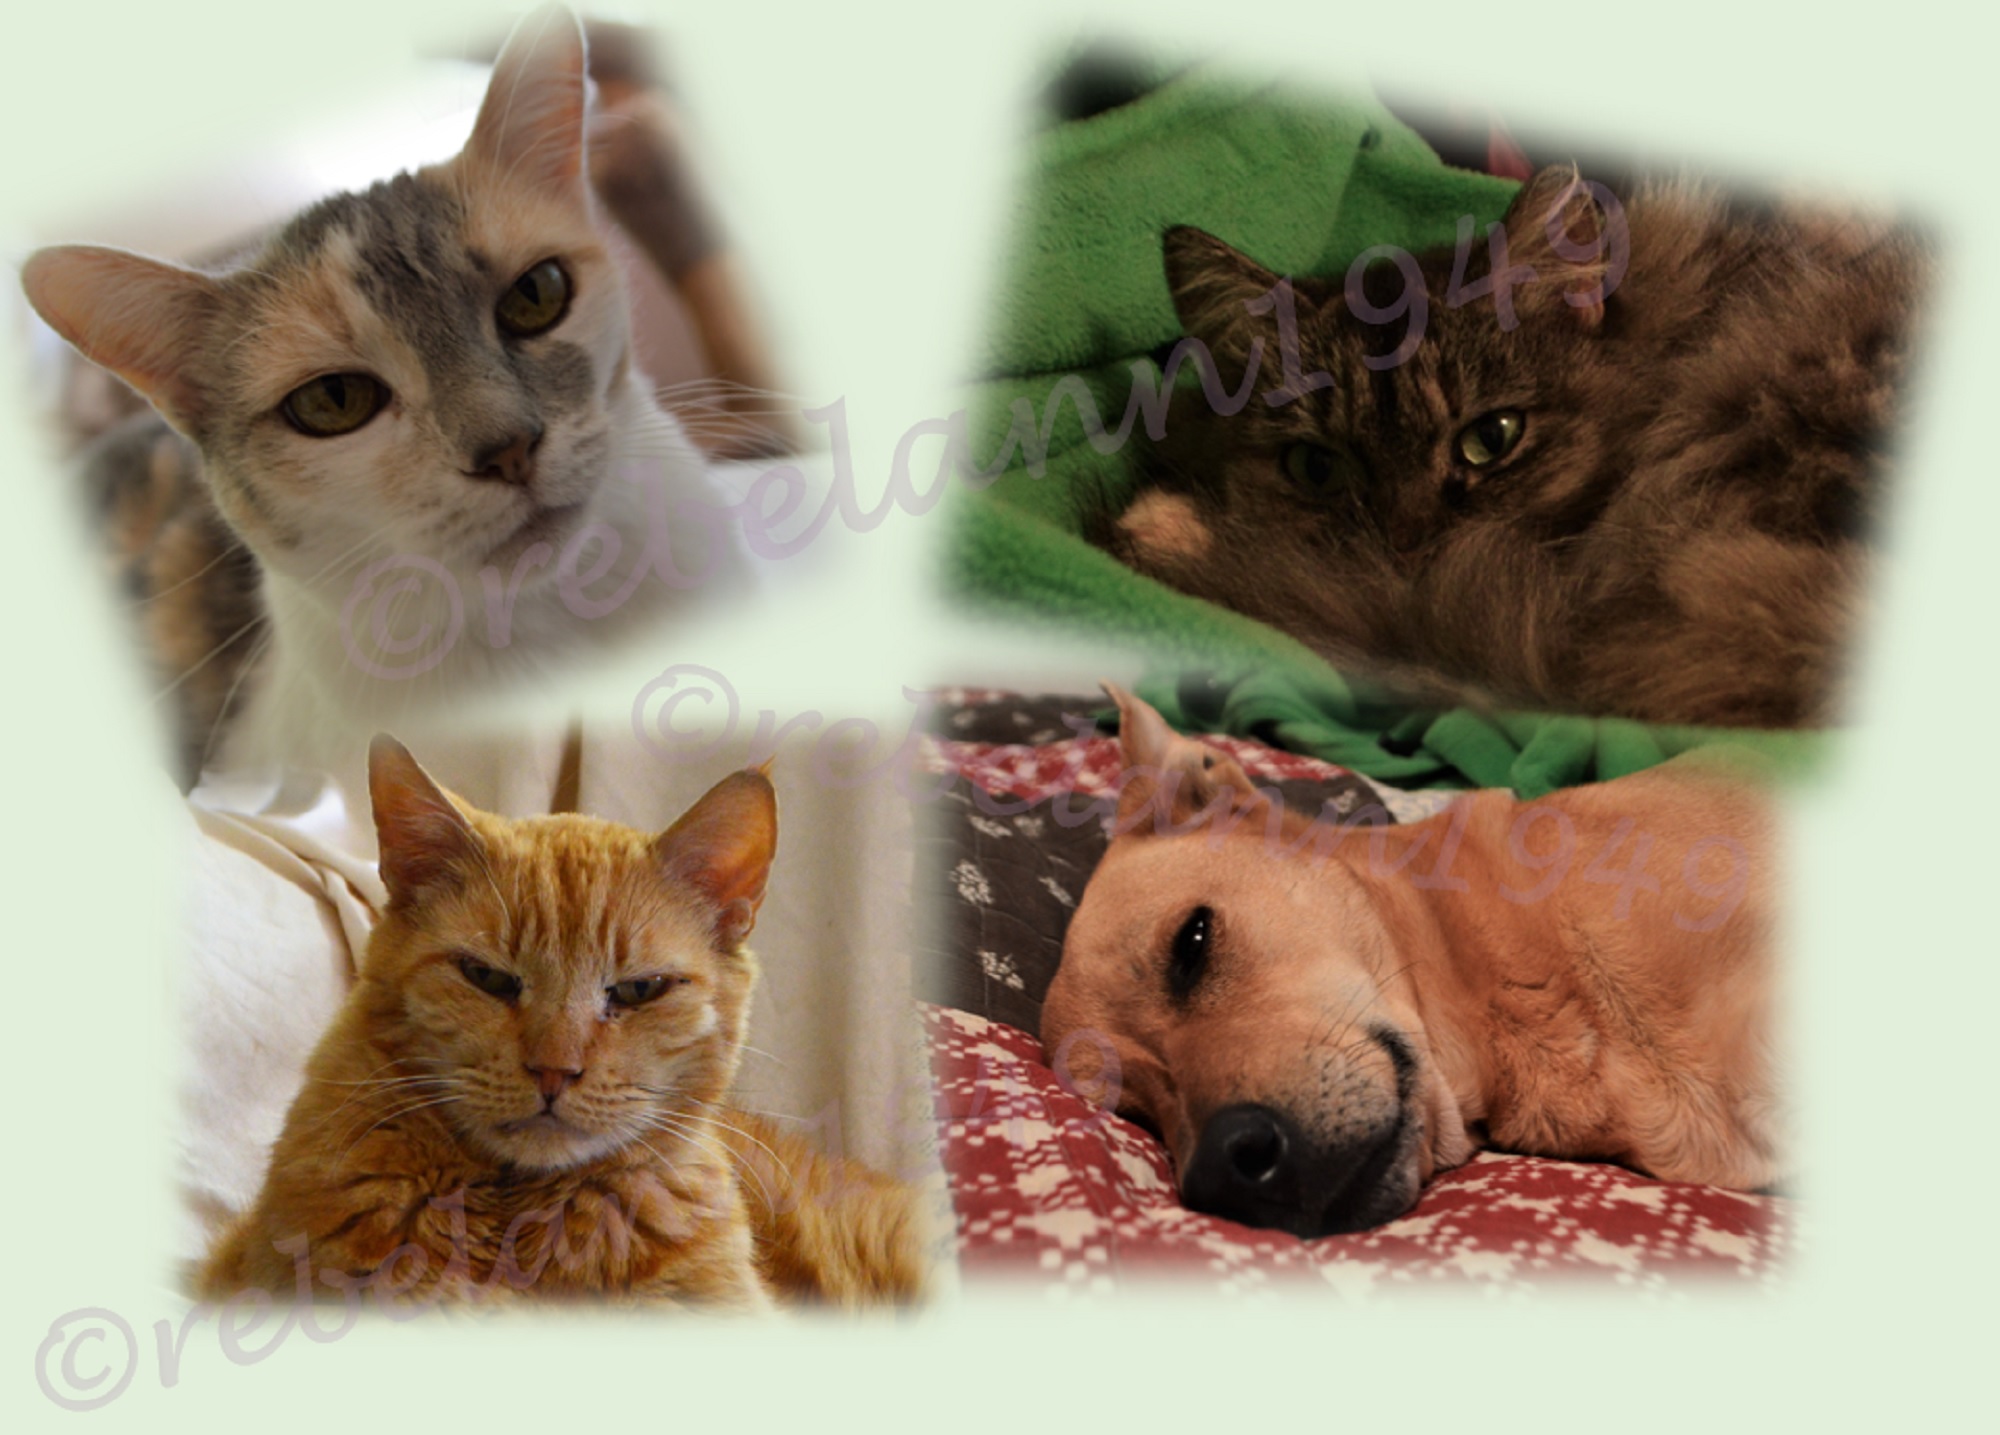 My furmily Max, Meetzee, Ally and Boobear collage created in xcel